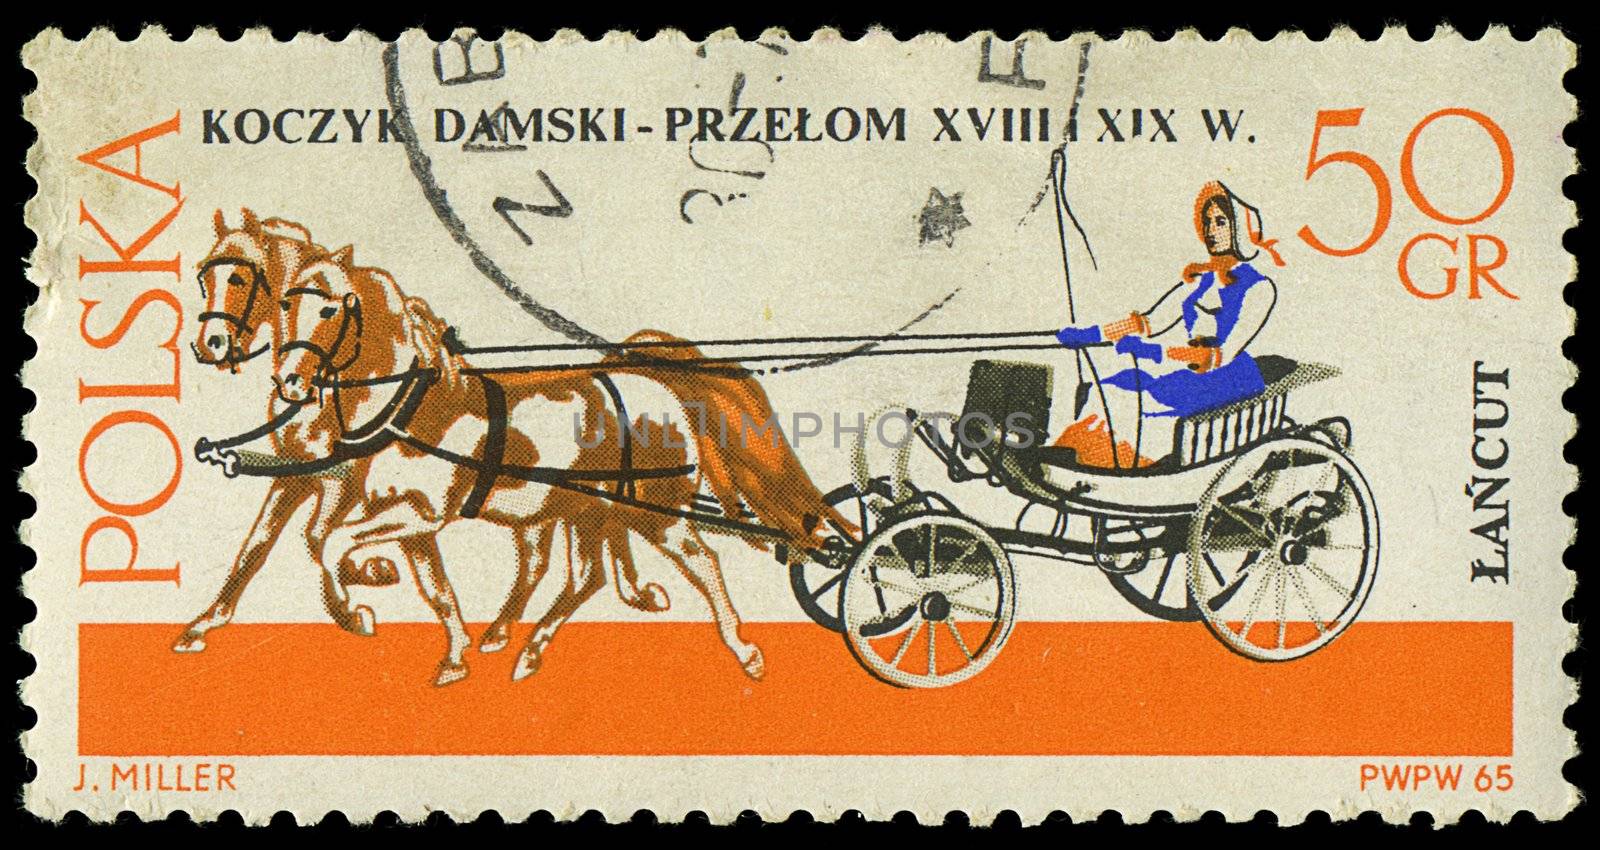 POLAND - CIRCA 1965: a stamp printed in Poland showing horses drawing carriage, circa 1965 by Zhukow